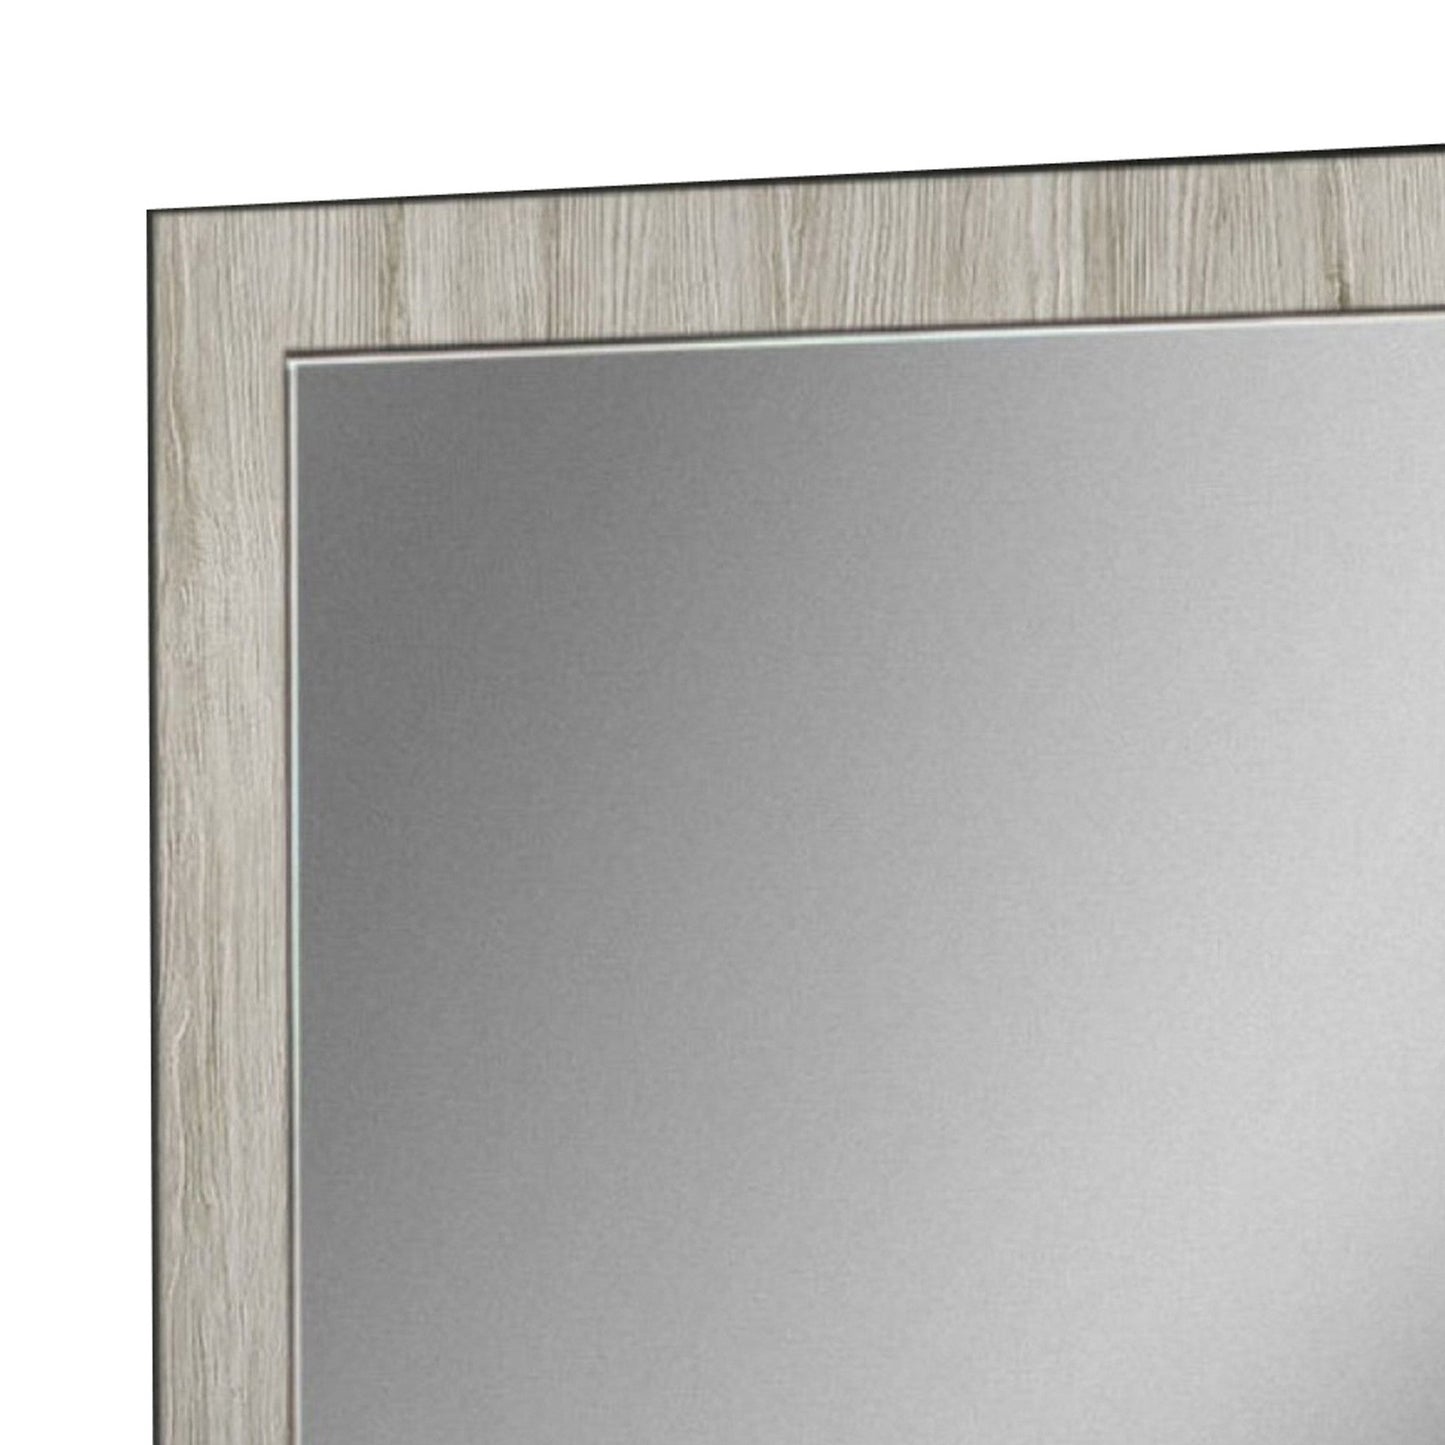 Benzara Black and Gray Dual Tone Wall Mirror With Wooden Frame